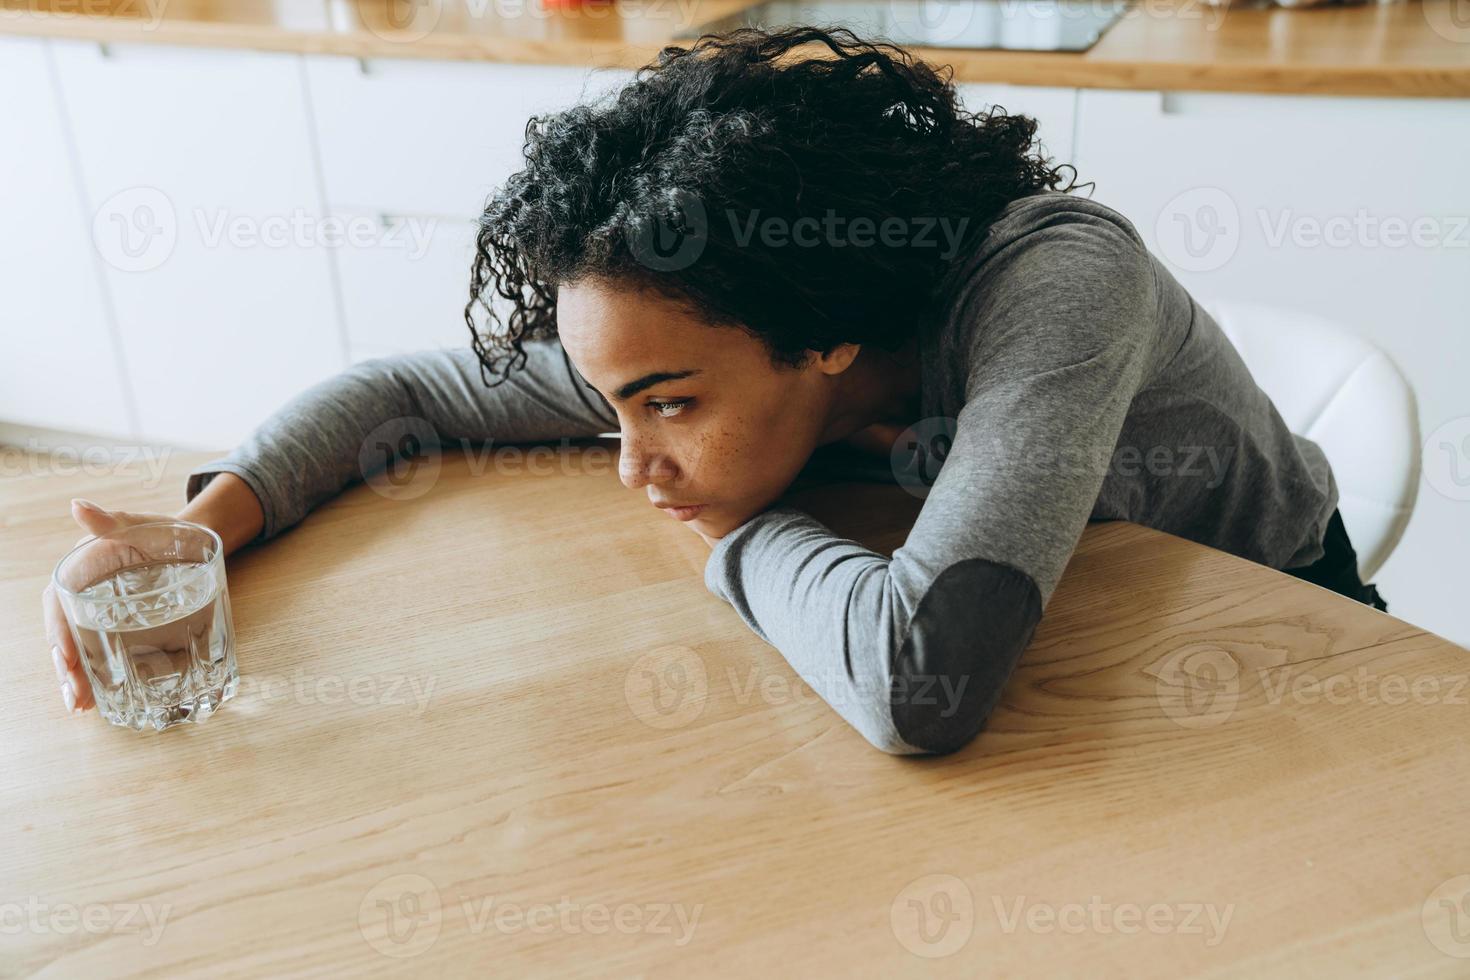 Young black woman looking at water glass while sitting in kitchen photo